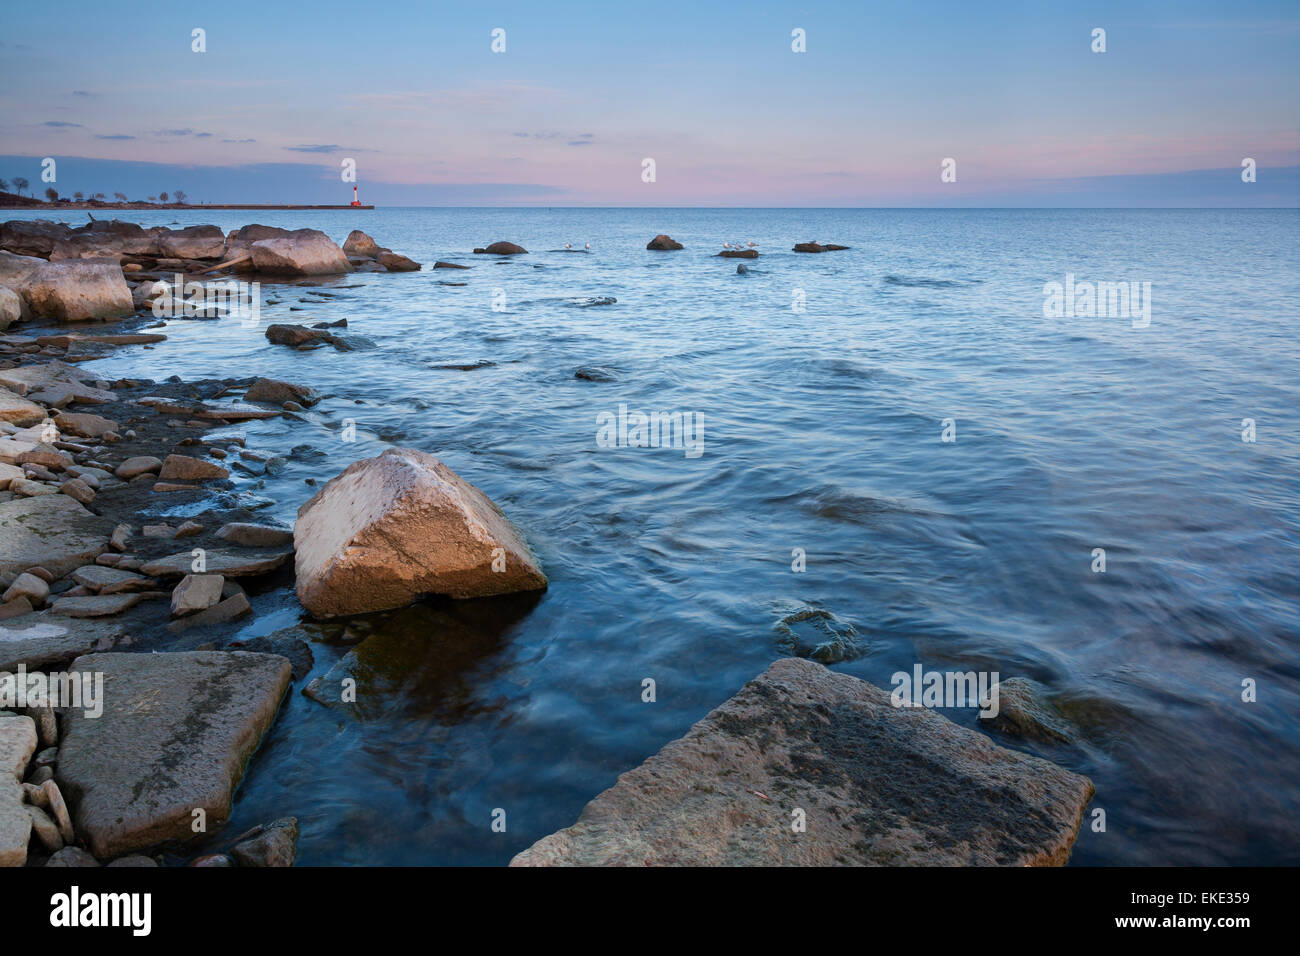 The rocky shoreline of Waterworks Park in Oakville, with a lighthouse in the background. Ontario, Canada. Stock Photo